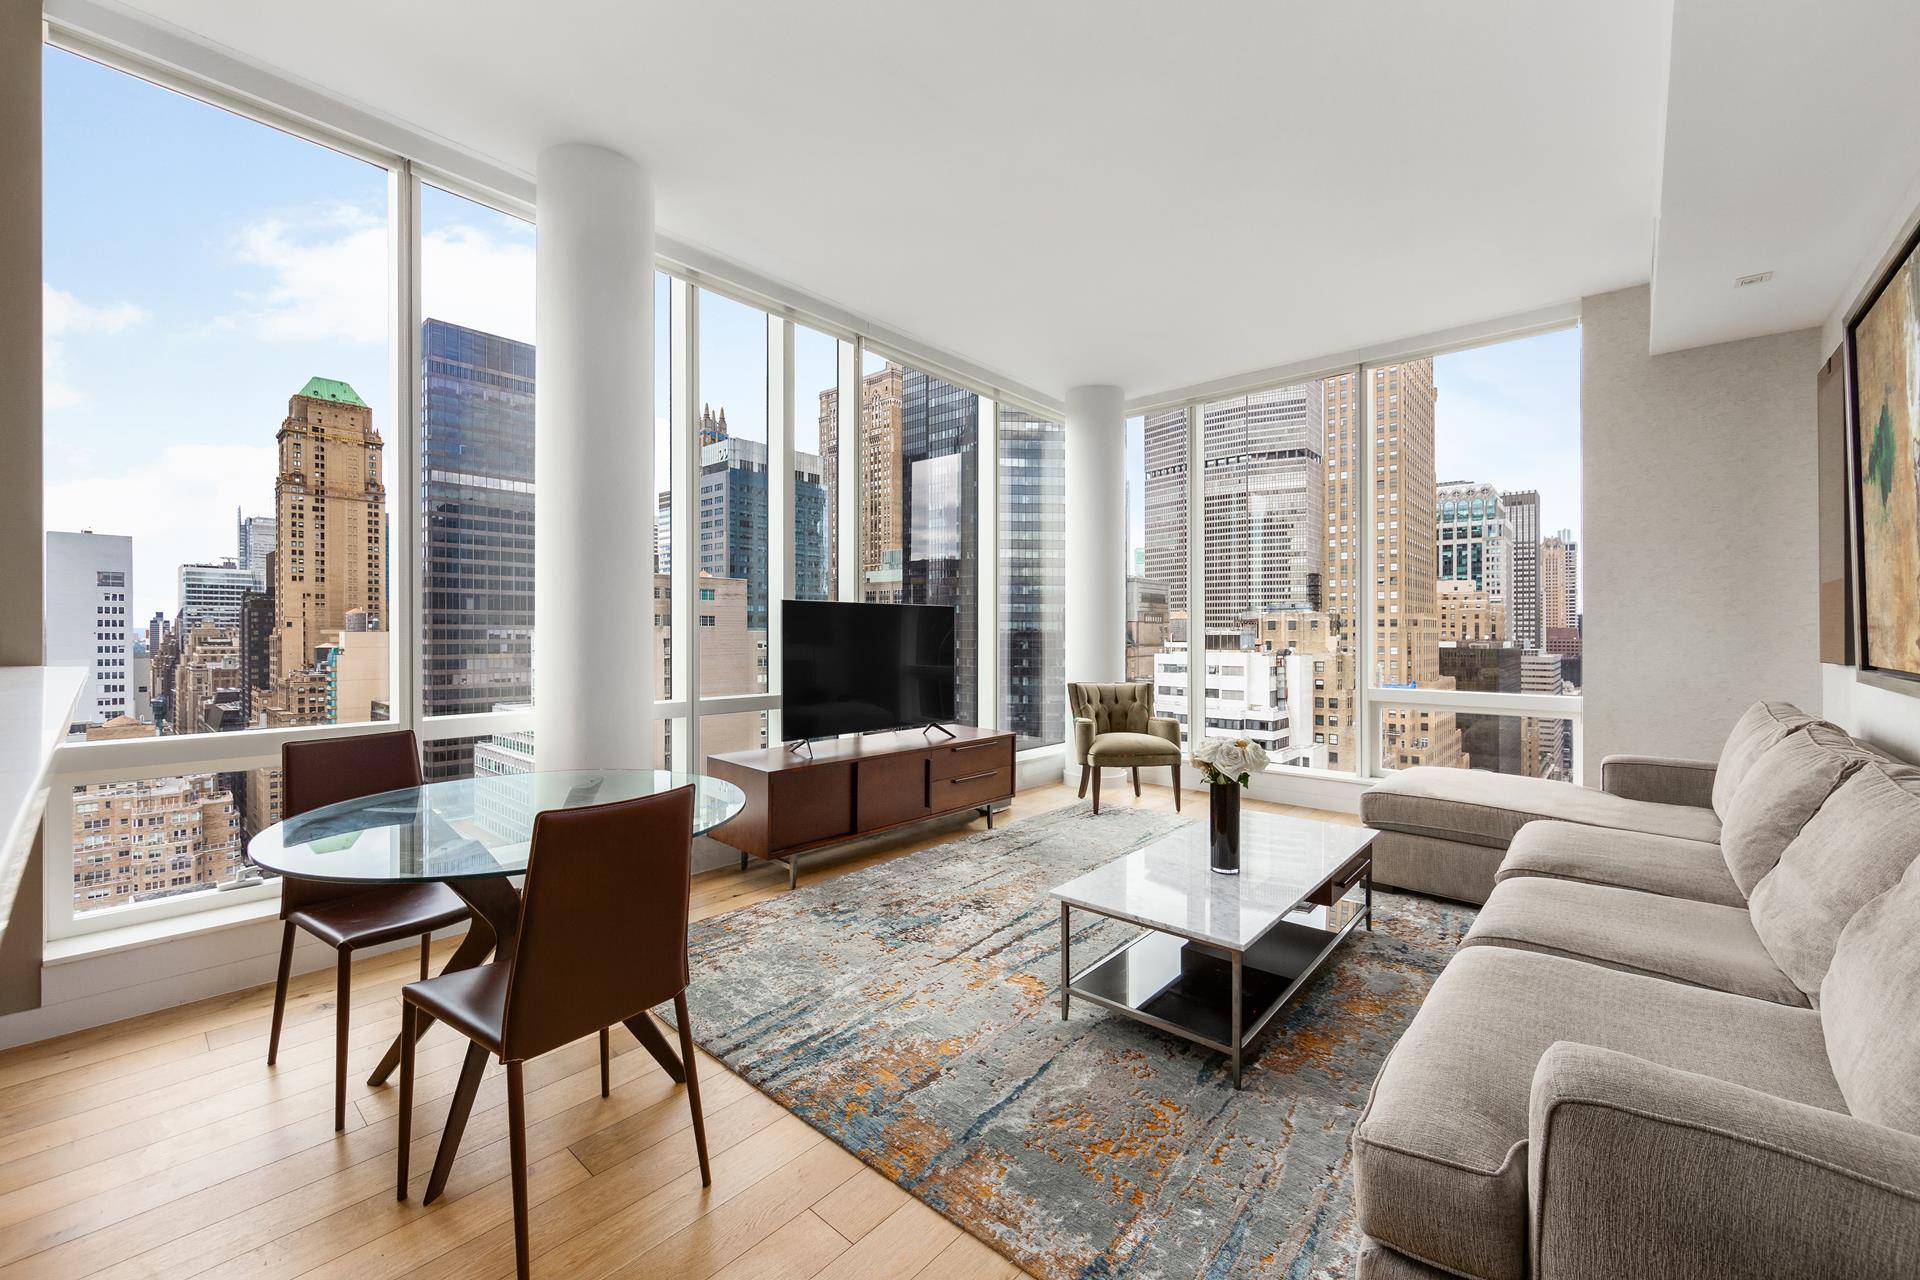 This beautiful two bedroom residence encompasses the entire Western side of the building providing fantastic light, sunset, and open city views.